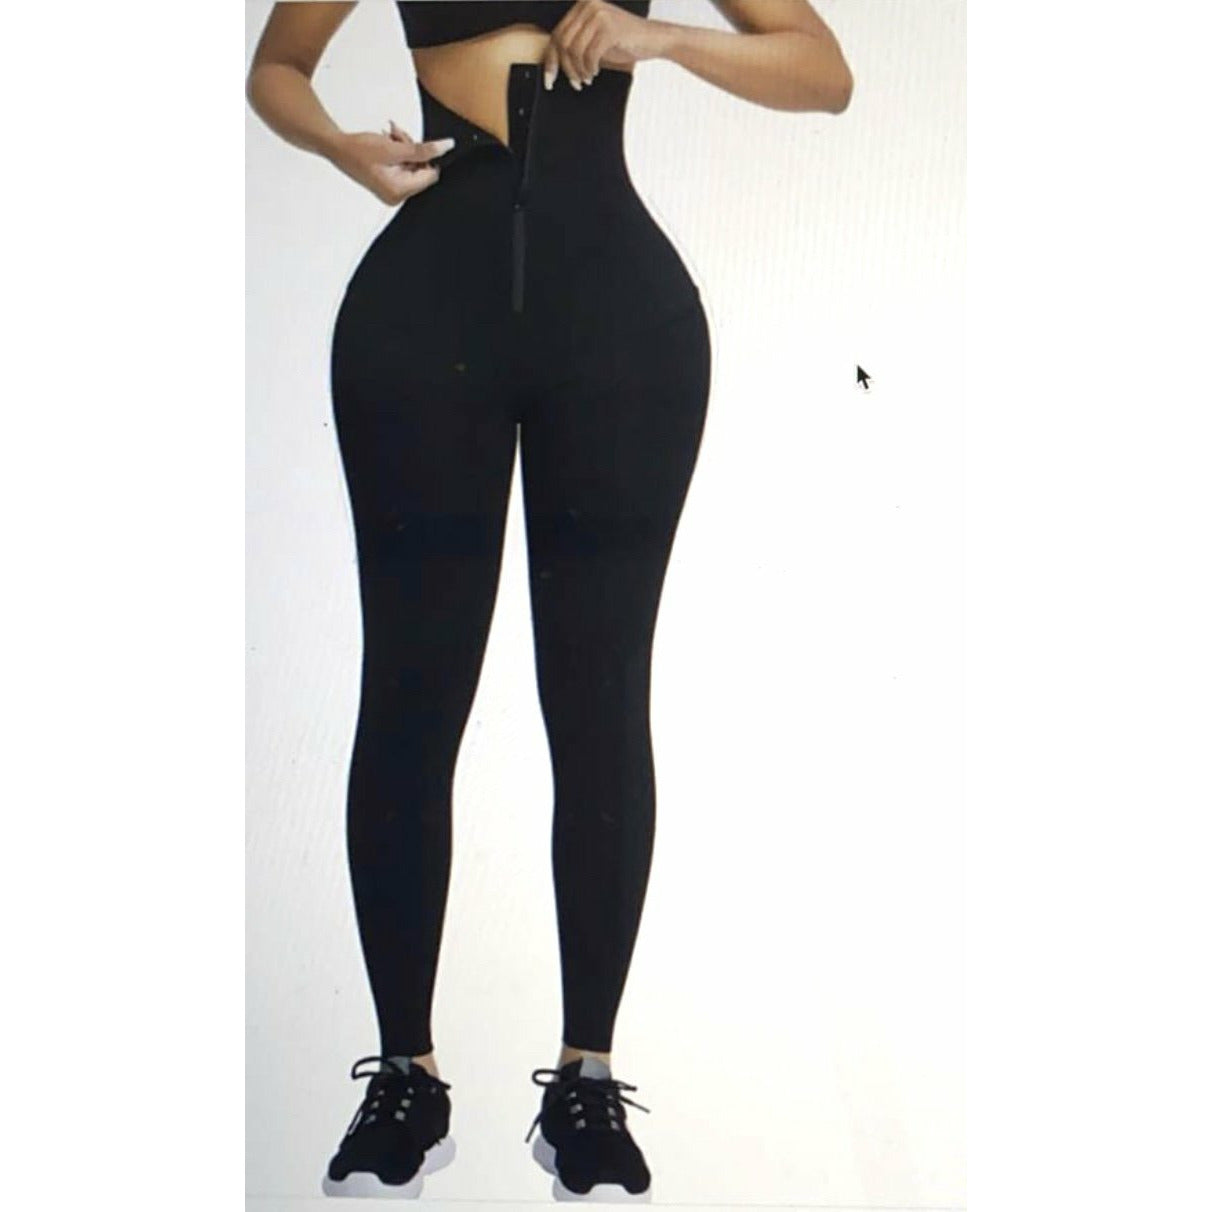 XK Latch & Zip Waist Training Tights (AGGRESSIVE GO A SIZE UP)